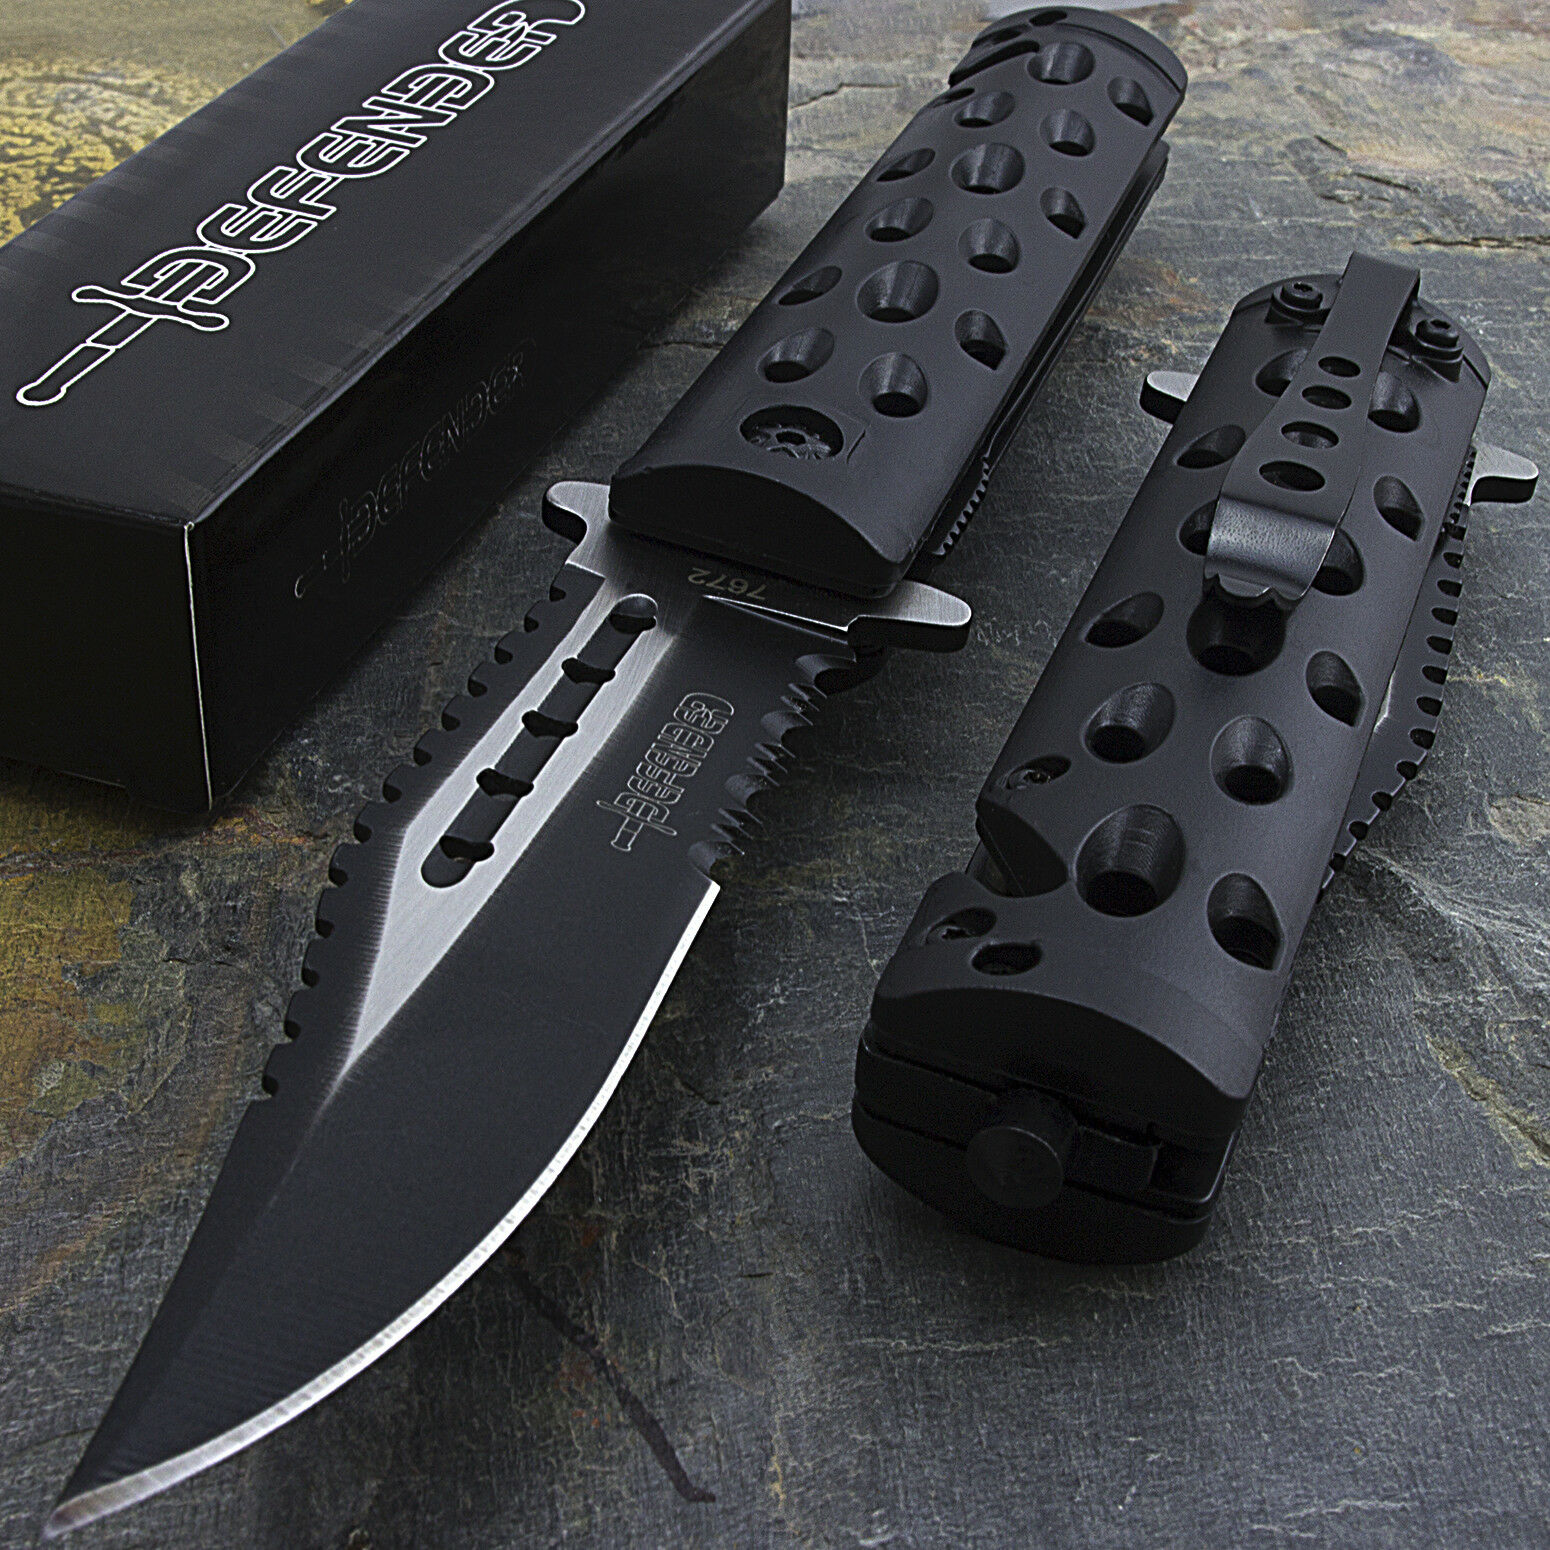 8.5" Spring Open Assisted Tactical Folding Rescue Pocket Knife Blade Assist Edc